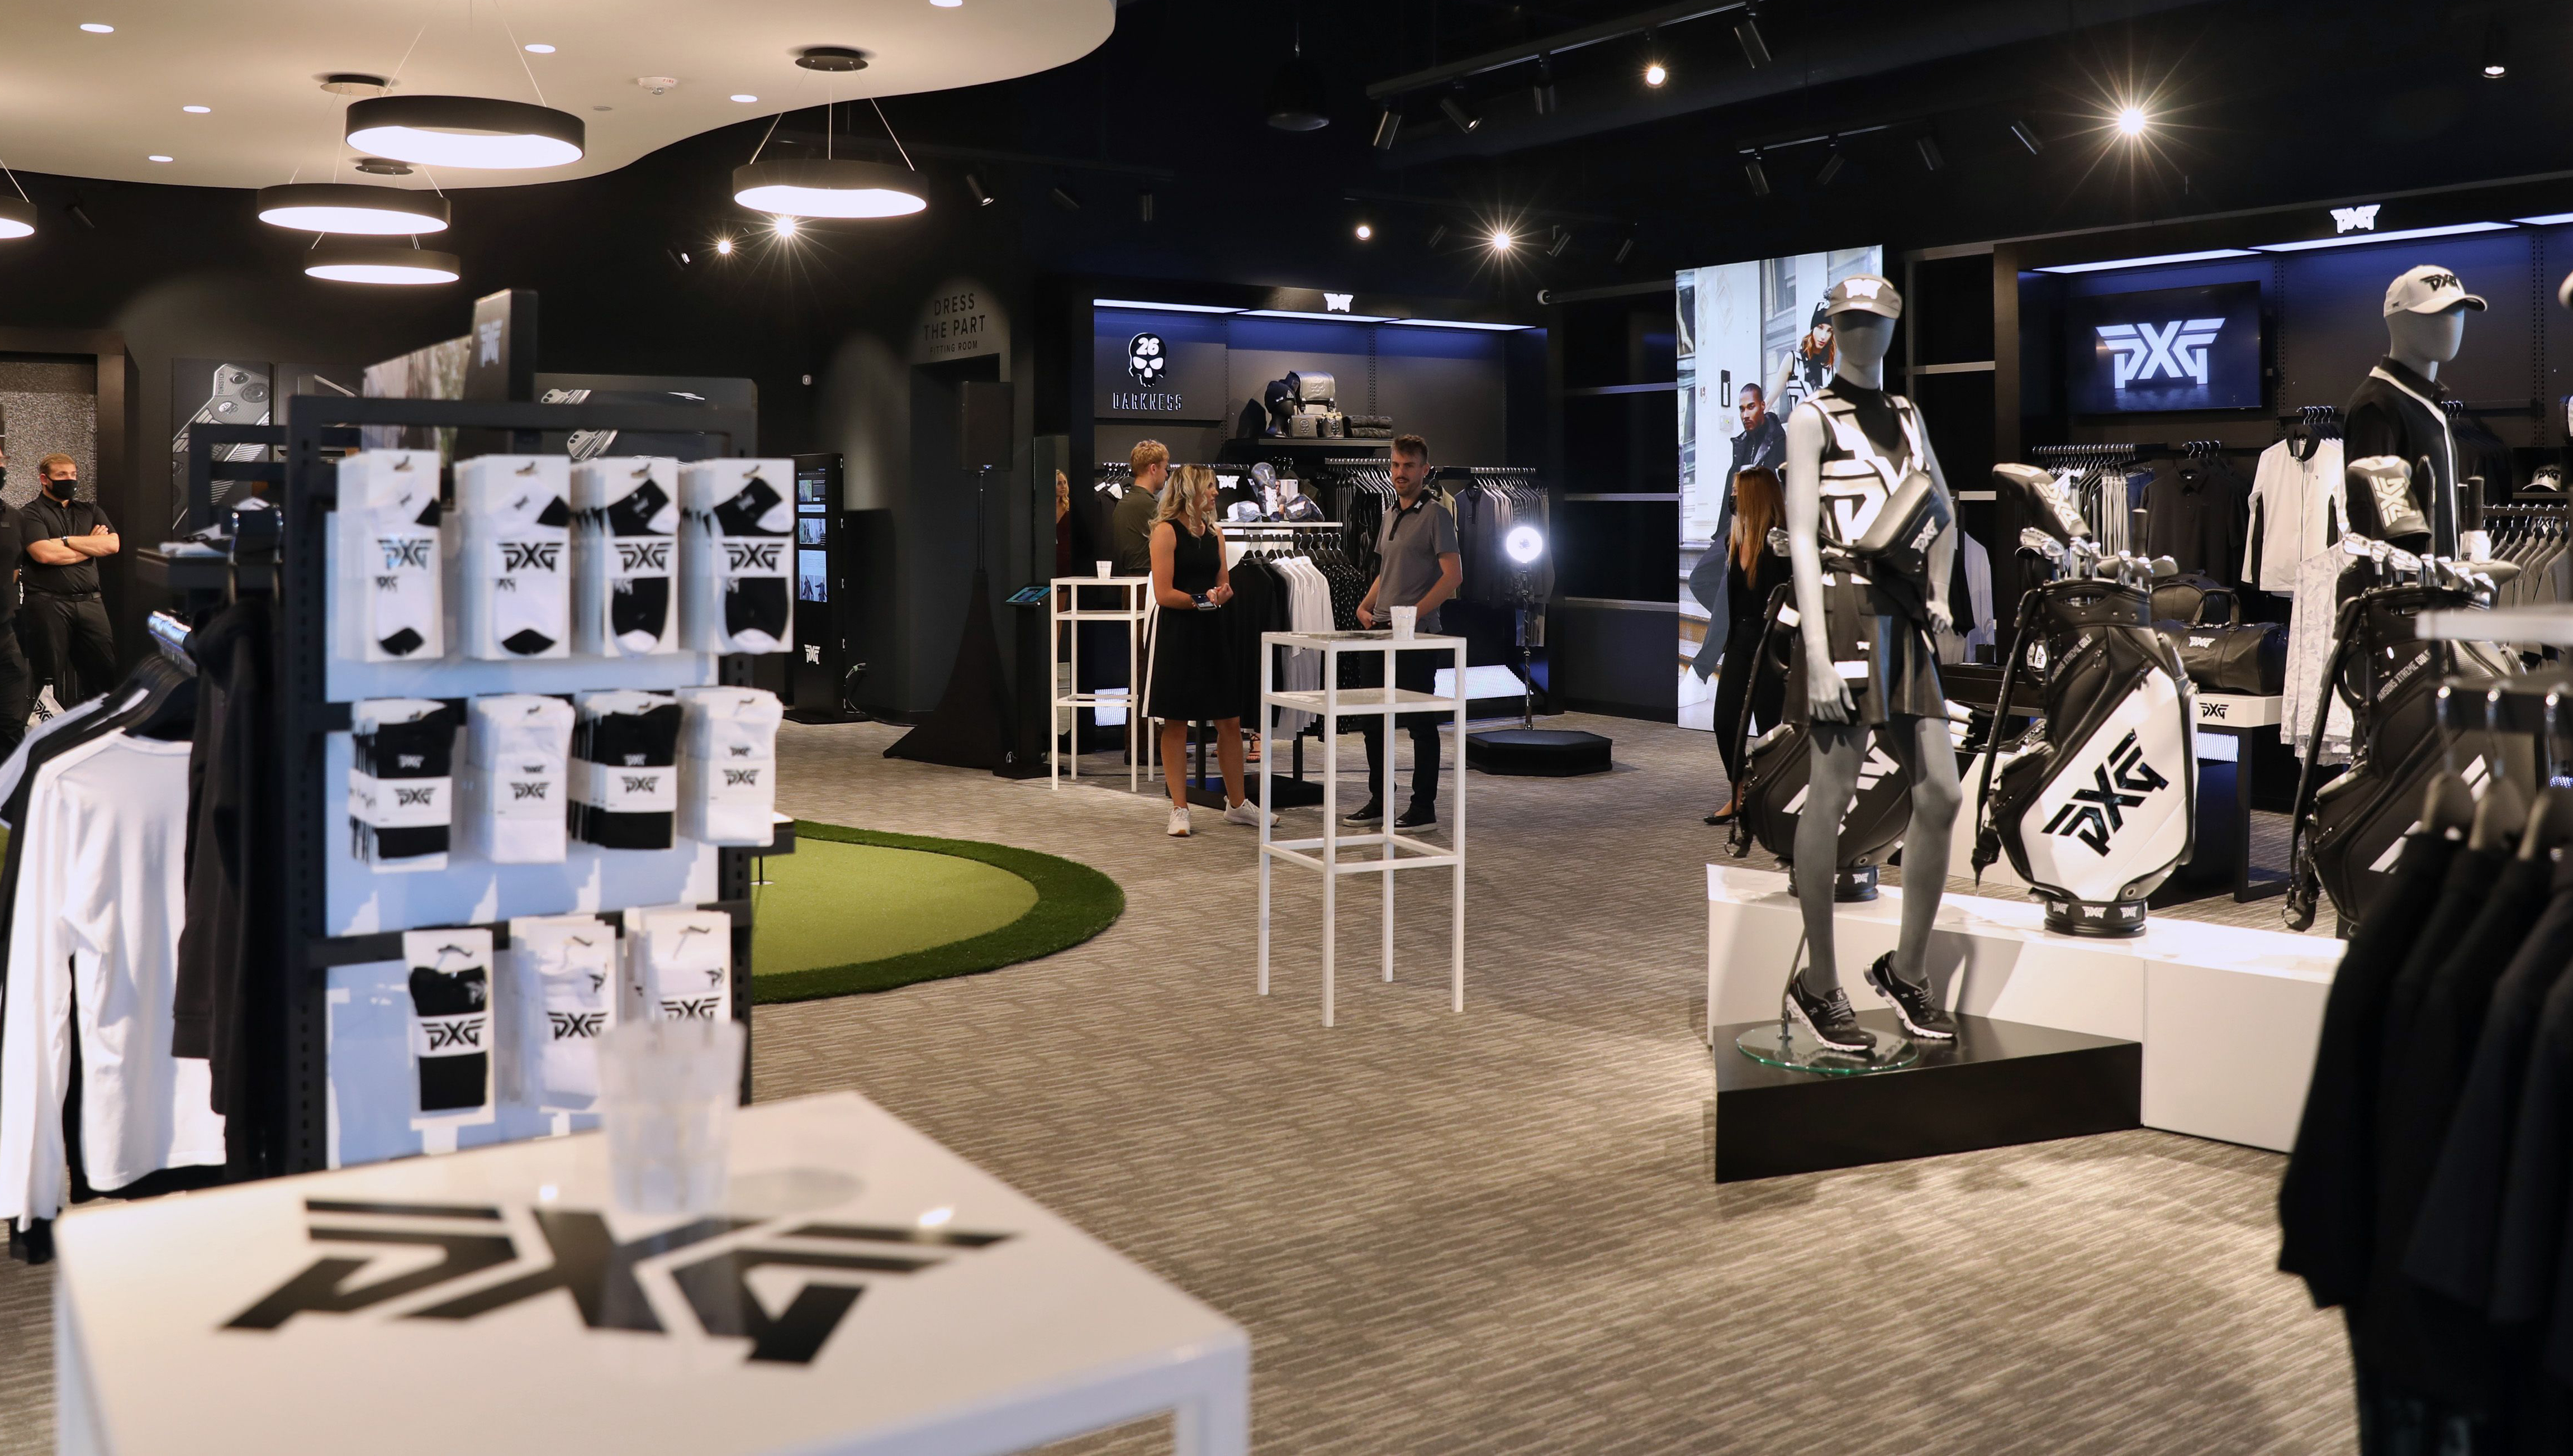 We attended PXGs store opening in Dallas to get a first-hand look at Bob Parsons evolving business strategy Golf Equipment Clubs, Balls, Bags Golf Digest